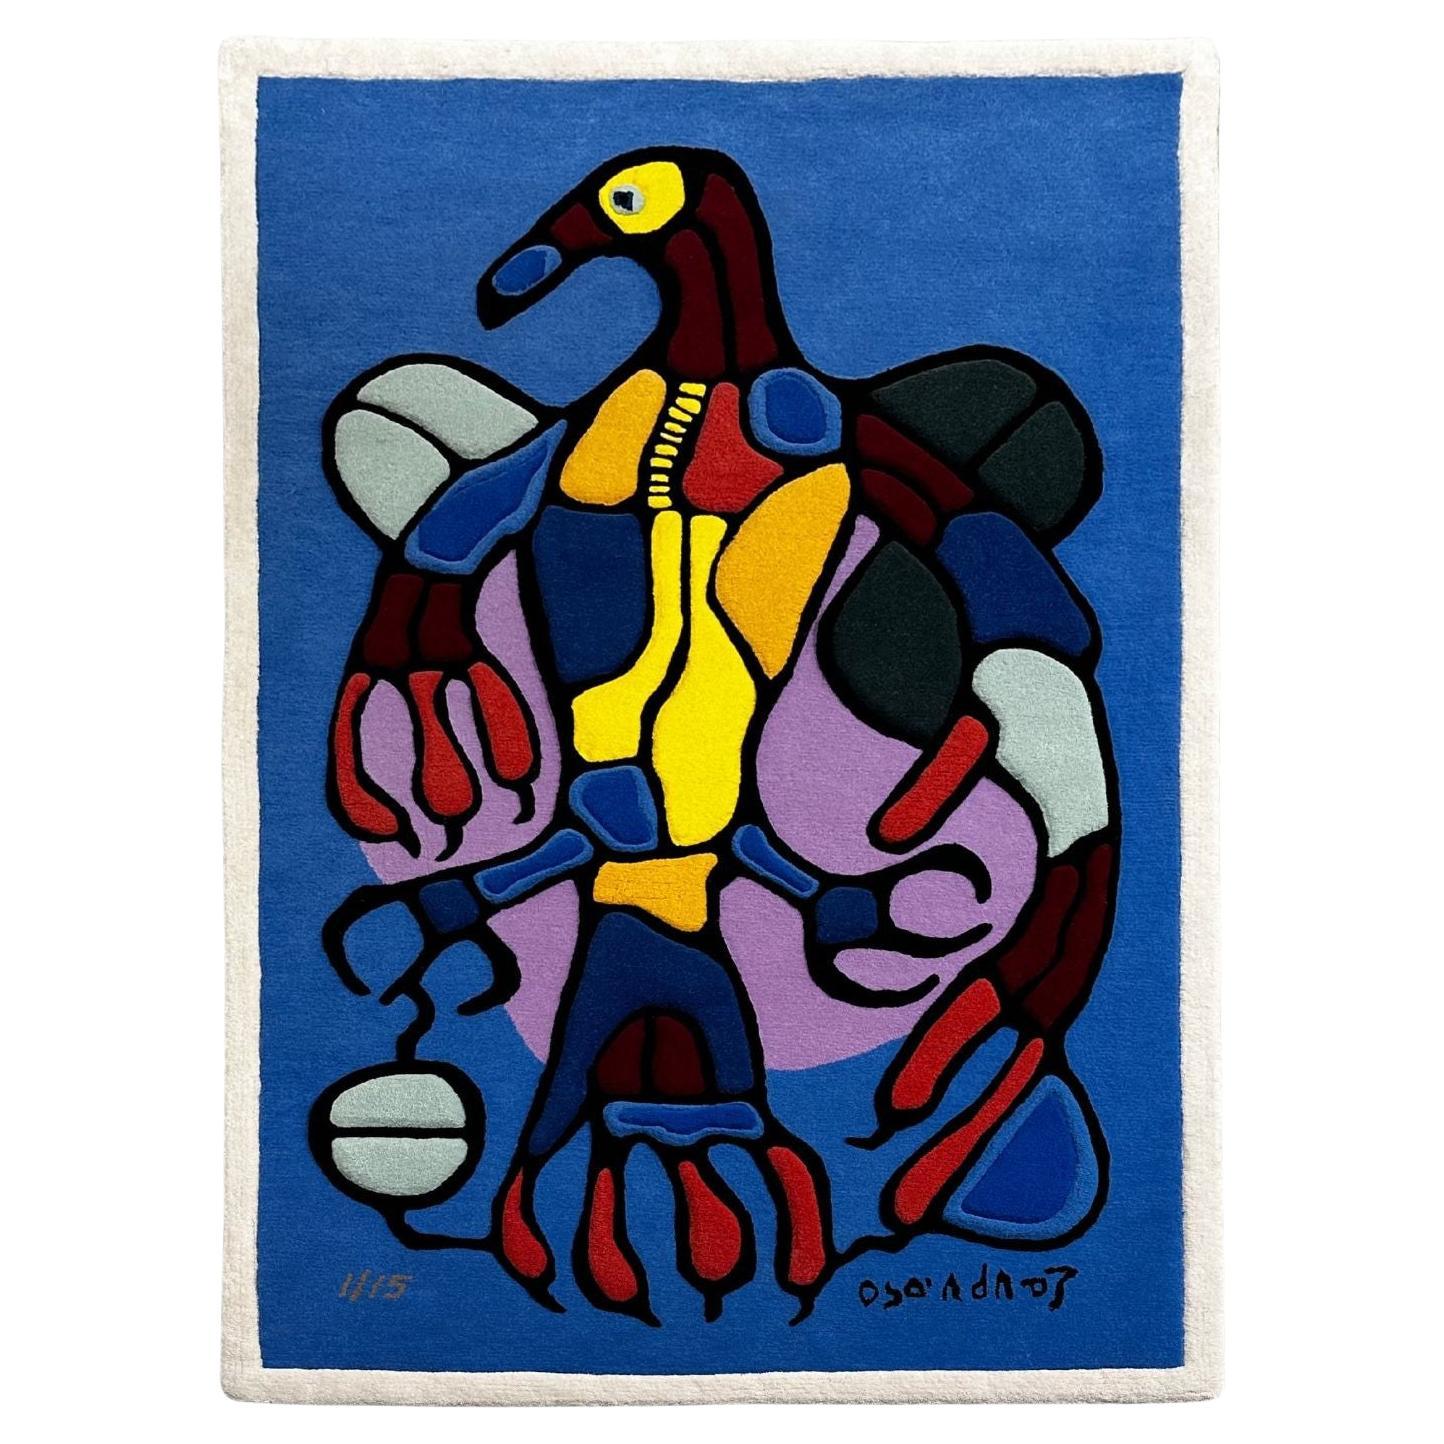 Norval Morrisseau "Astral Thunderbird" Wall Hanging Tapestry Signed, 1970 For Sale